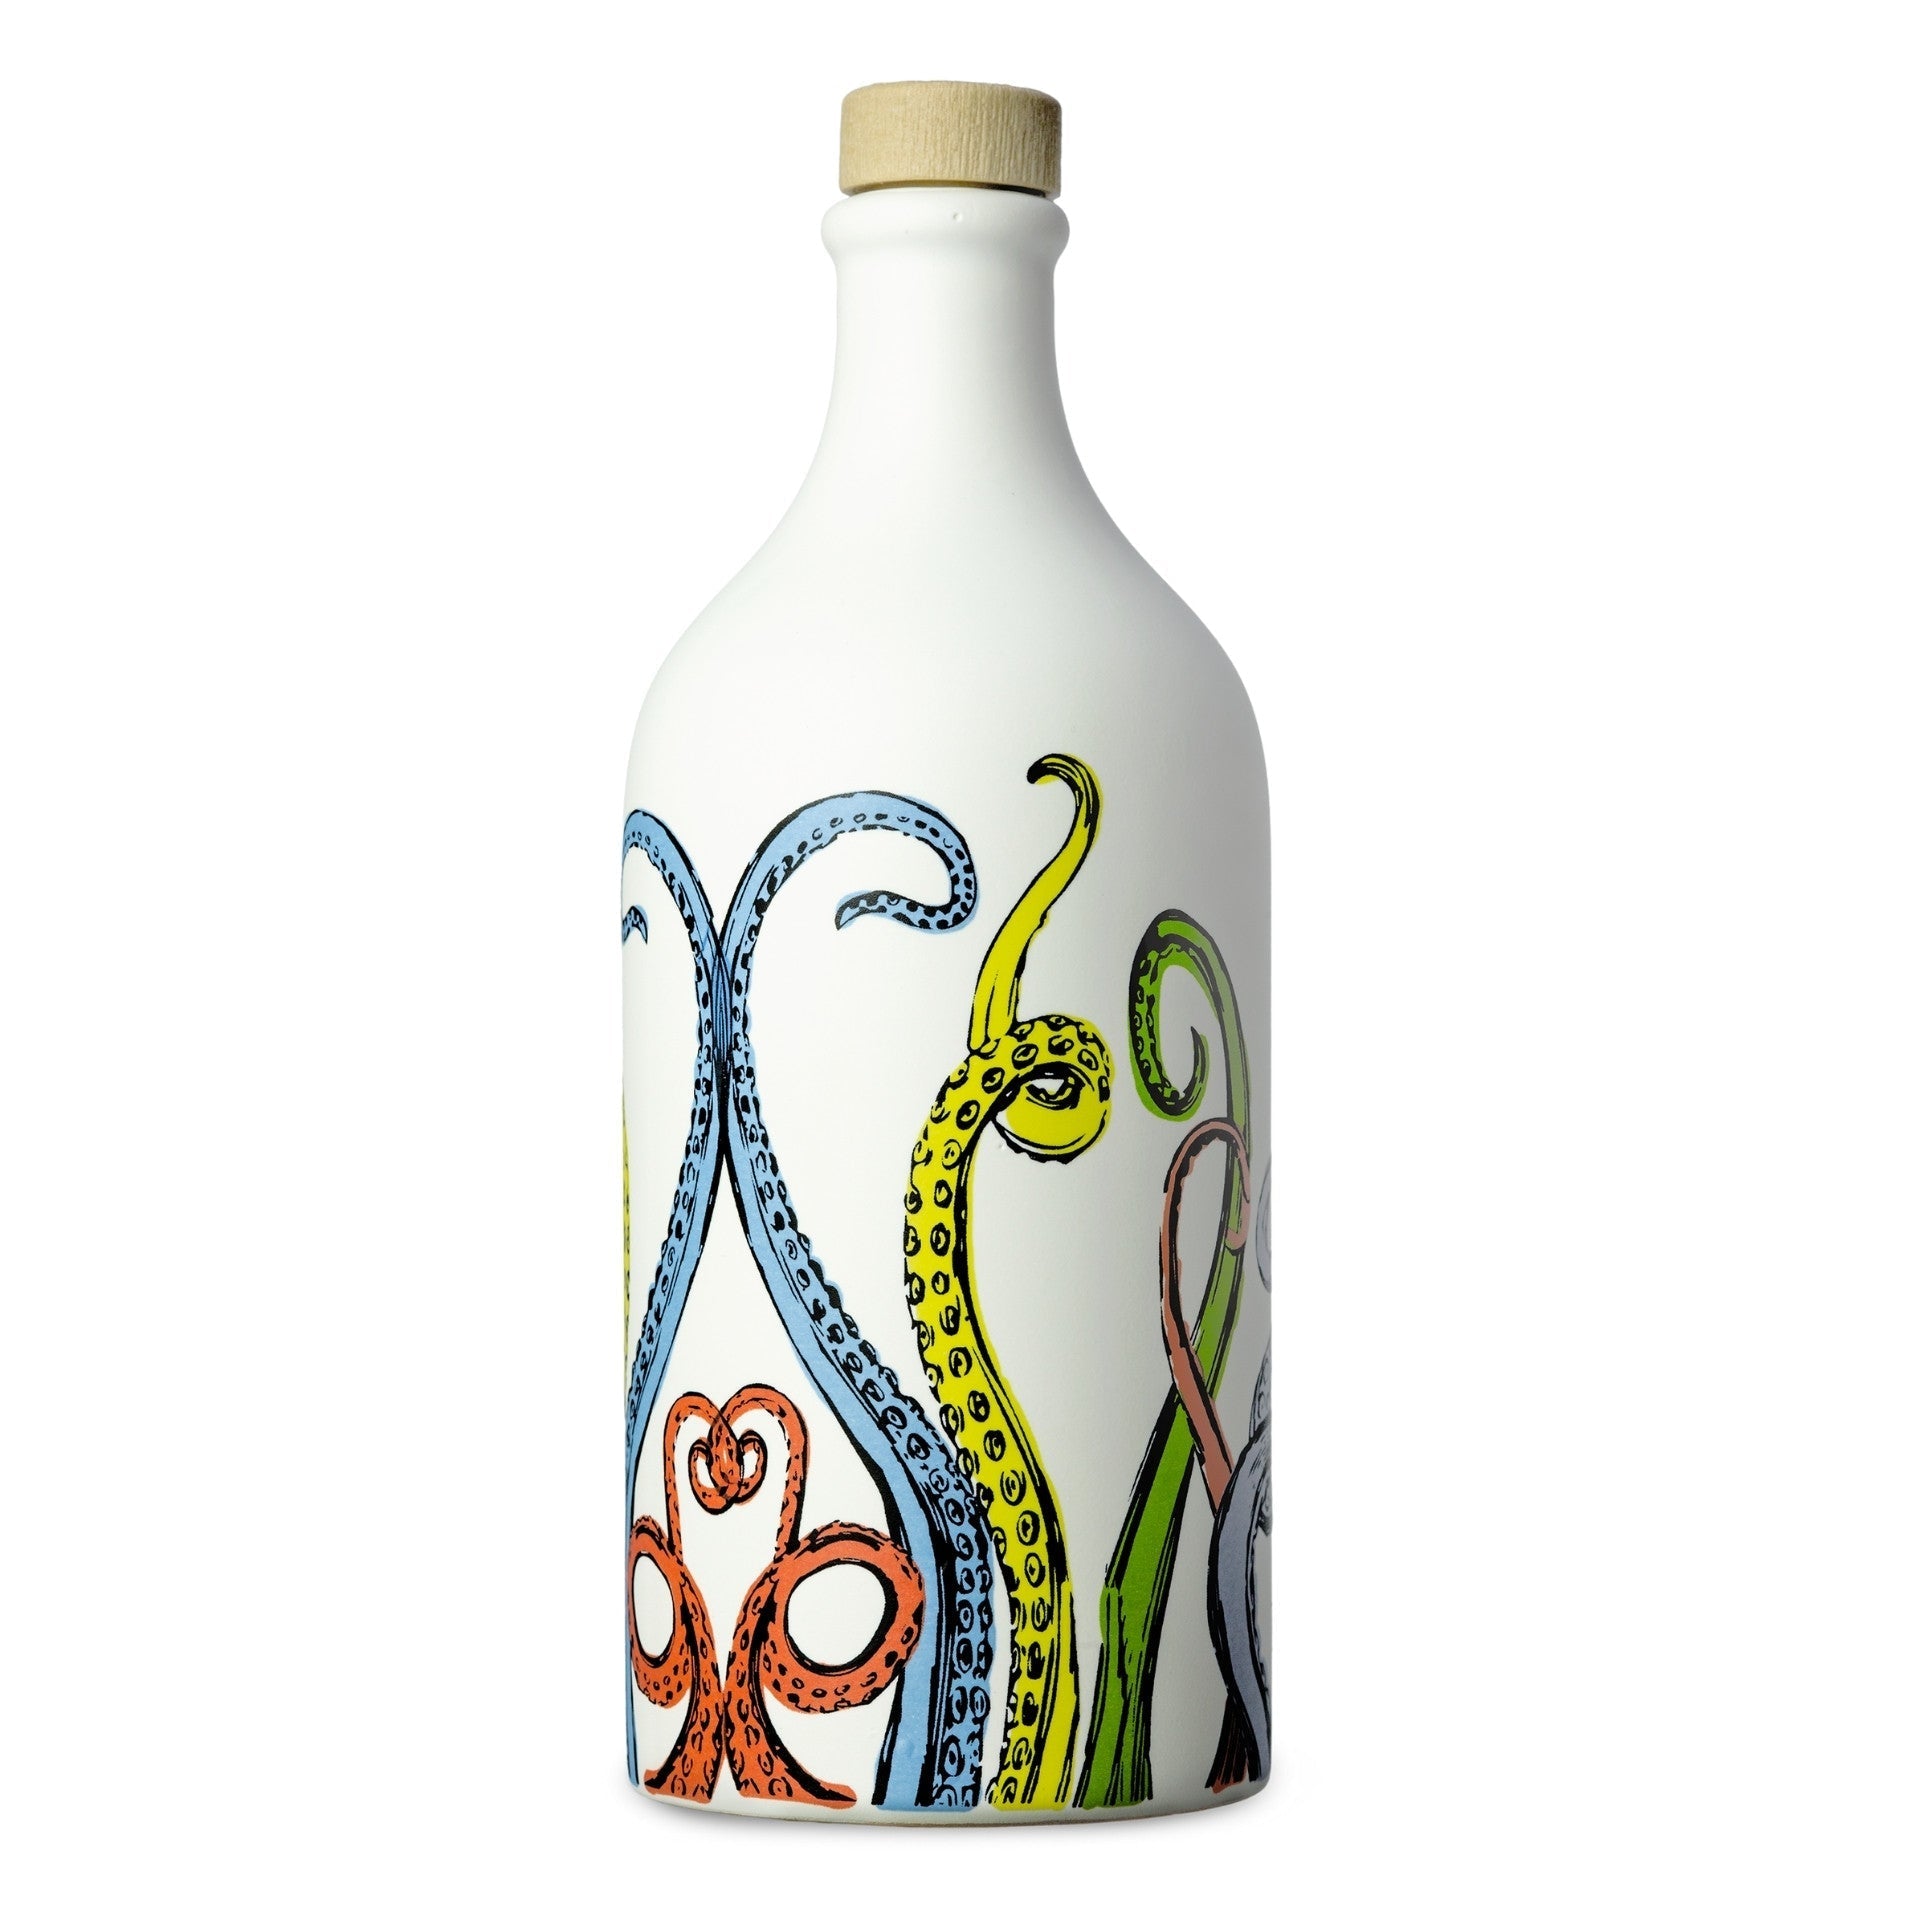 Frantoio Muraglia POP ART Tentacles Intense Fruity Extra Virgin Olive Oil in Ceramic Bottle 500ml  | Imported and distributed in the UK by Just Gourmet Foods